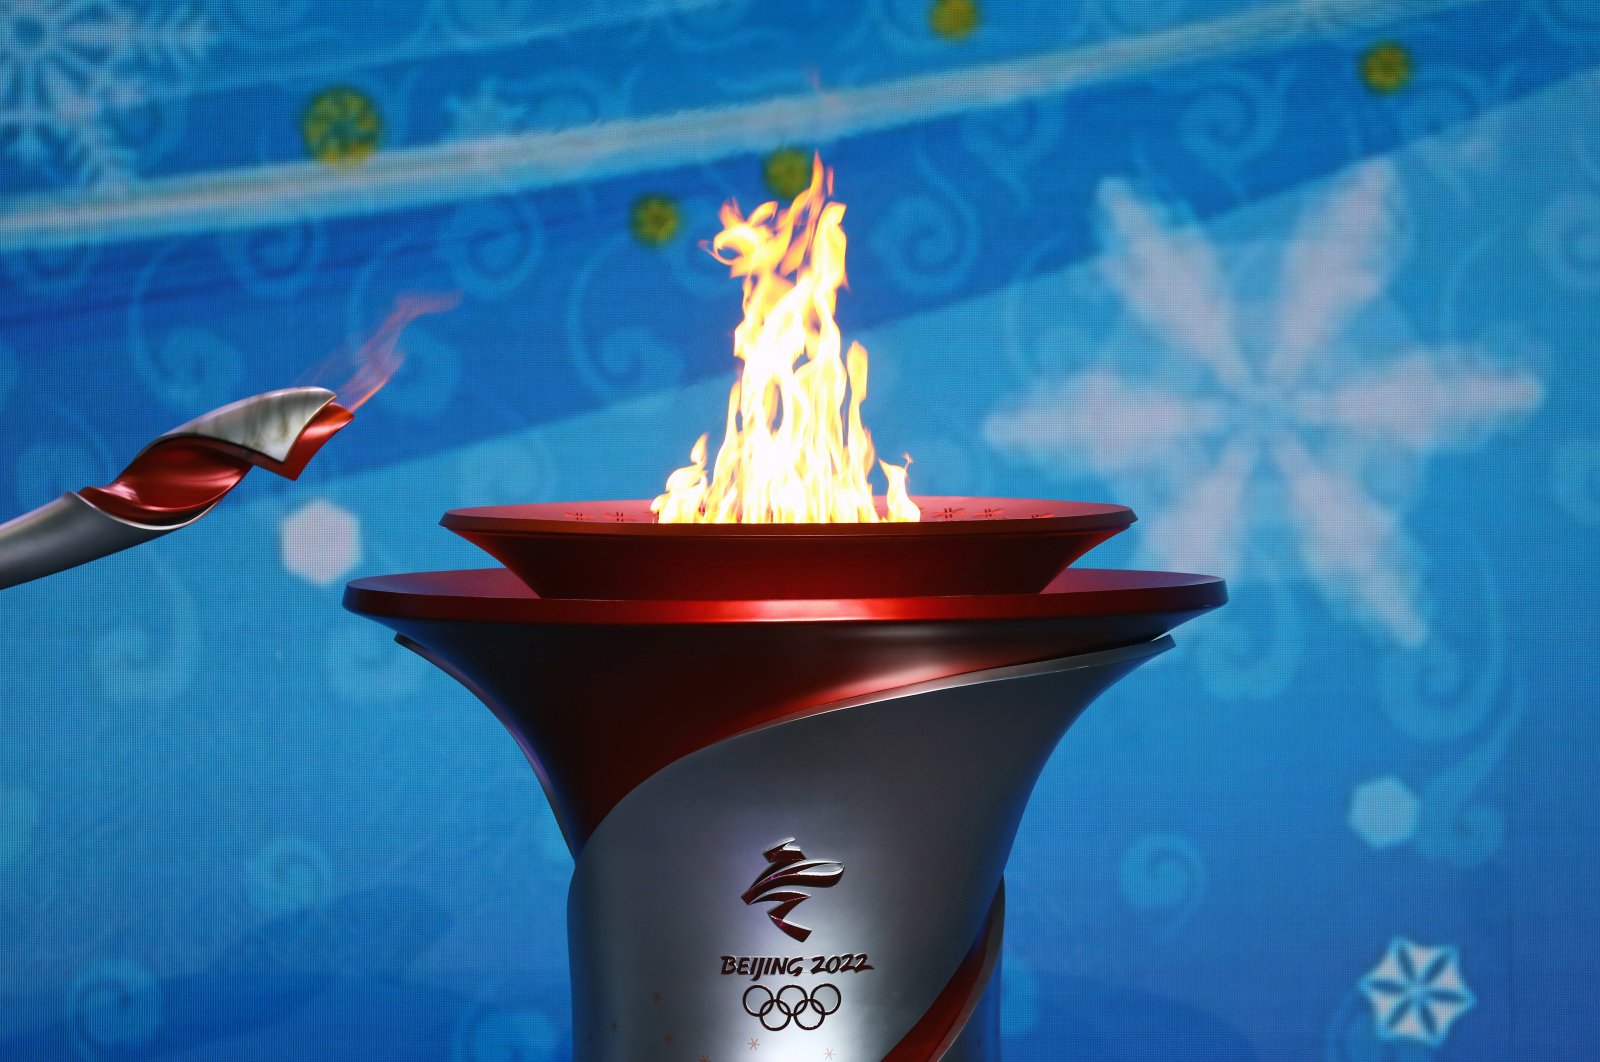 The Olympic flame is transferred from a torch to a cauldron at the ceremony to welcome the flame for the Beijing 2022 Winter Olympics, Beijing, China, Oct. 20, 2021. (Reuters Photo)